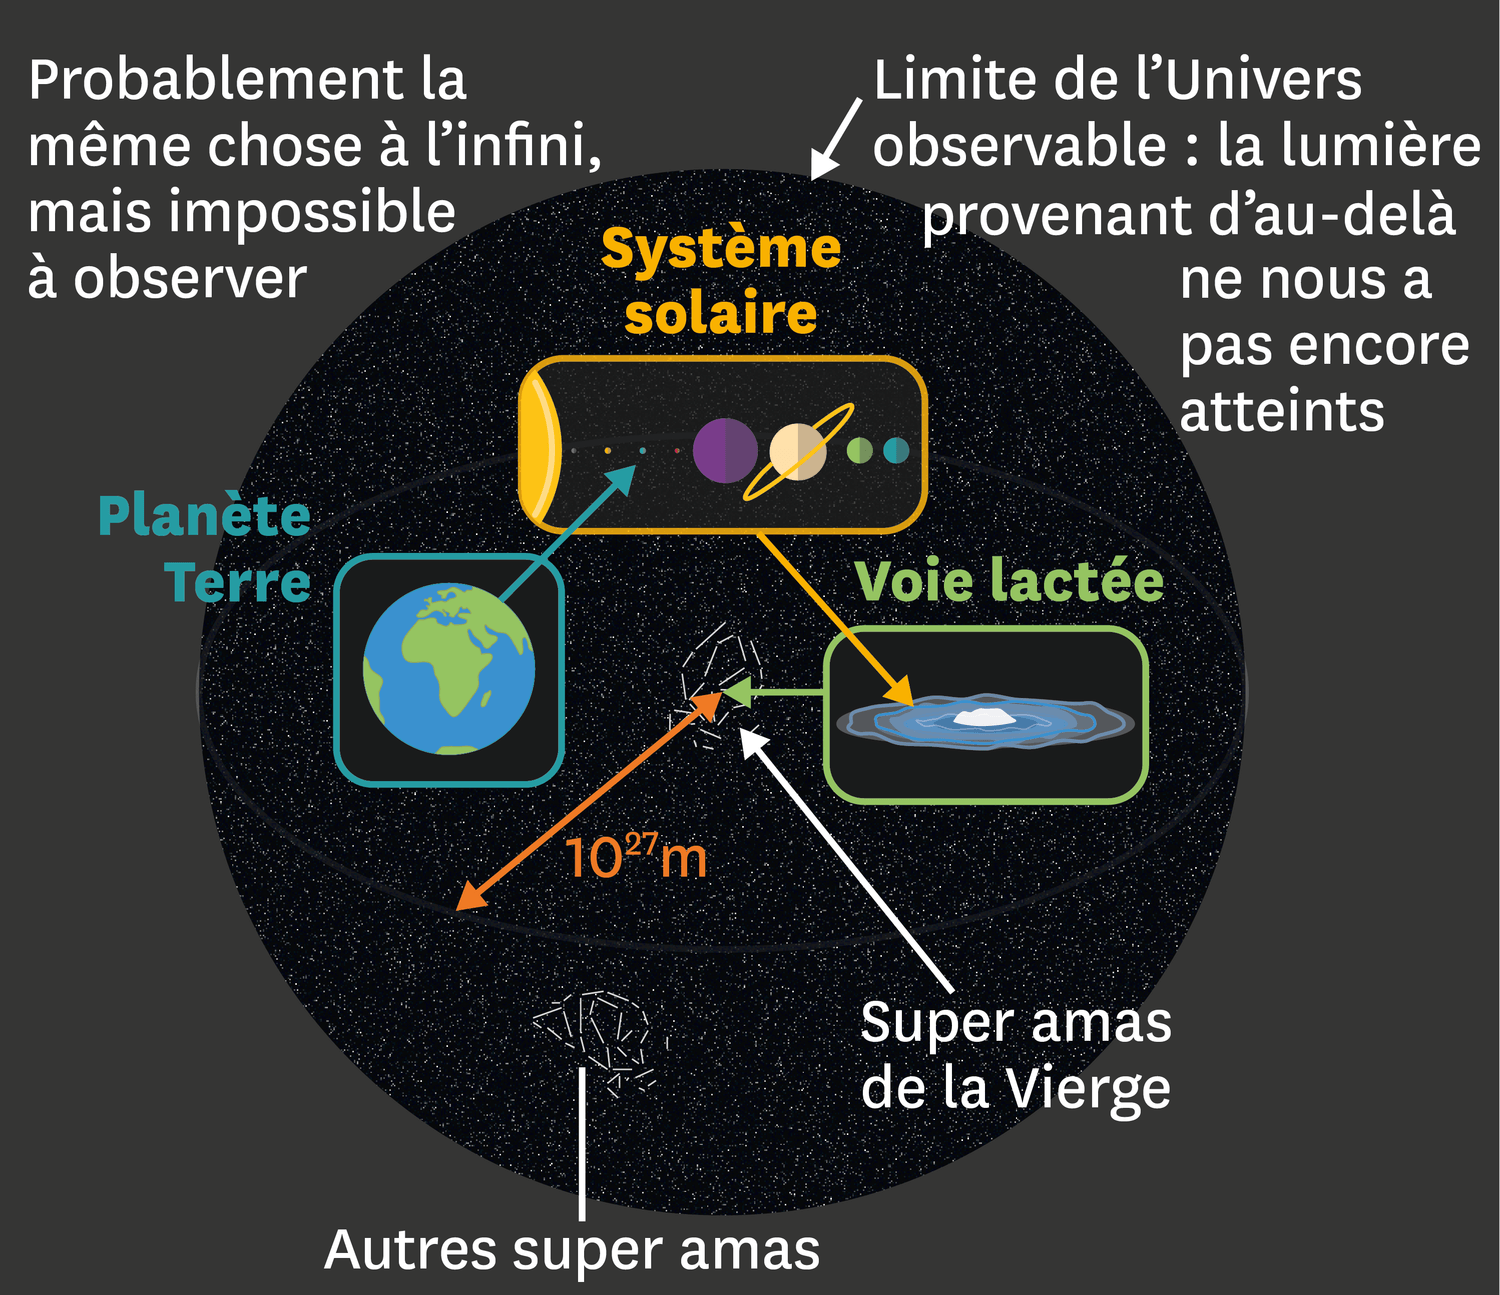 <stamp theme=pc-green1>Doc. 2</stamp> L'Univers observable.